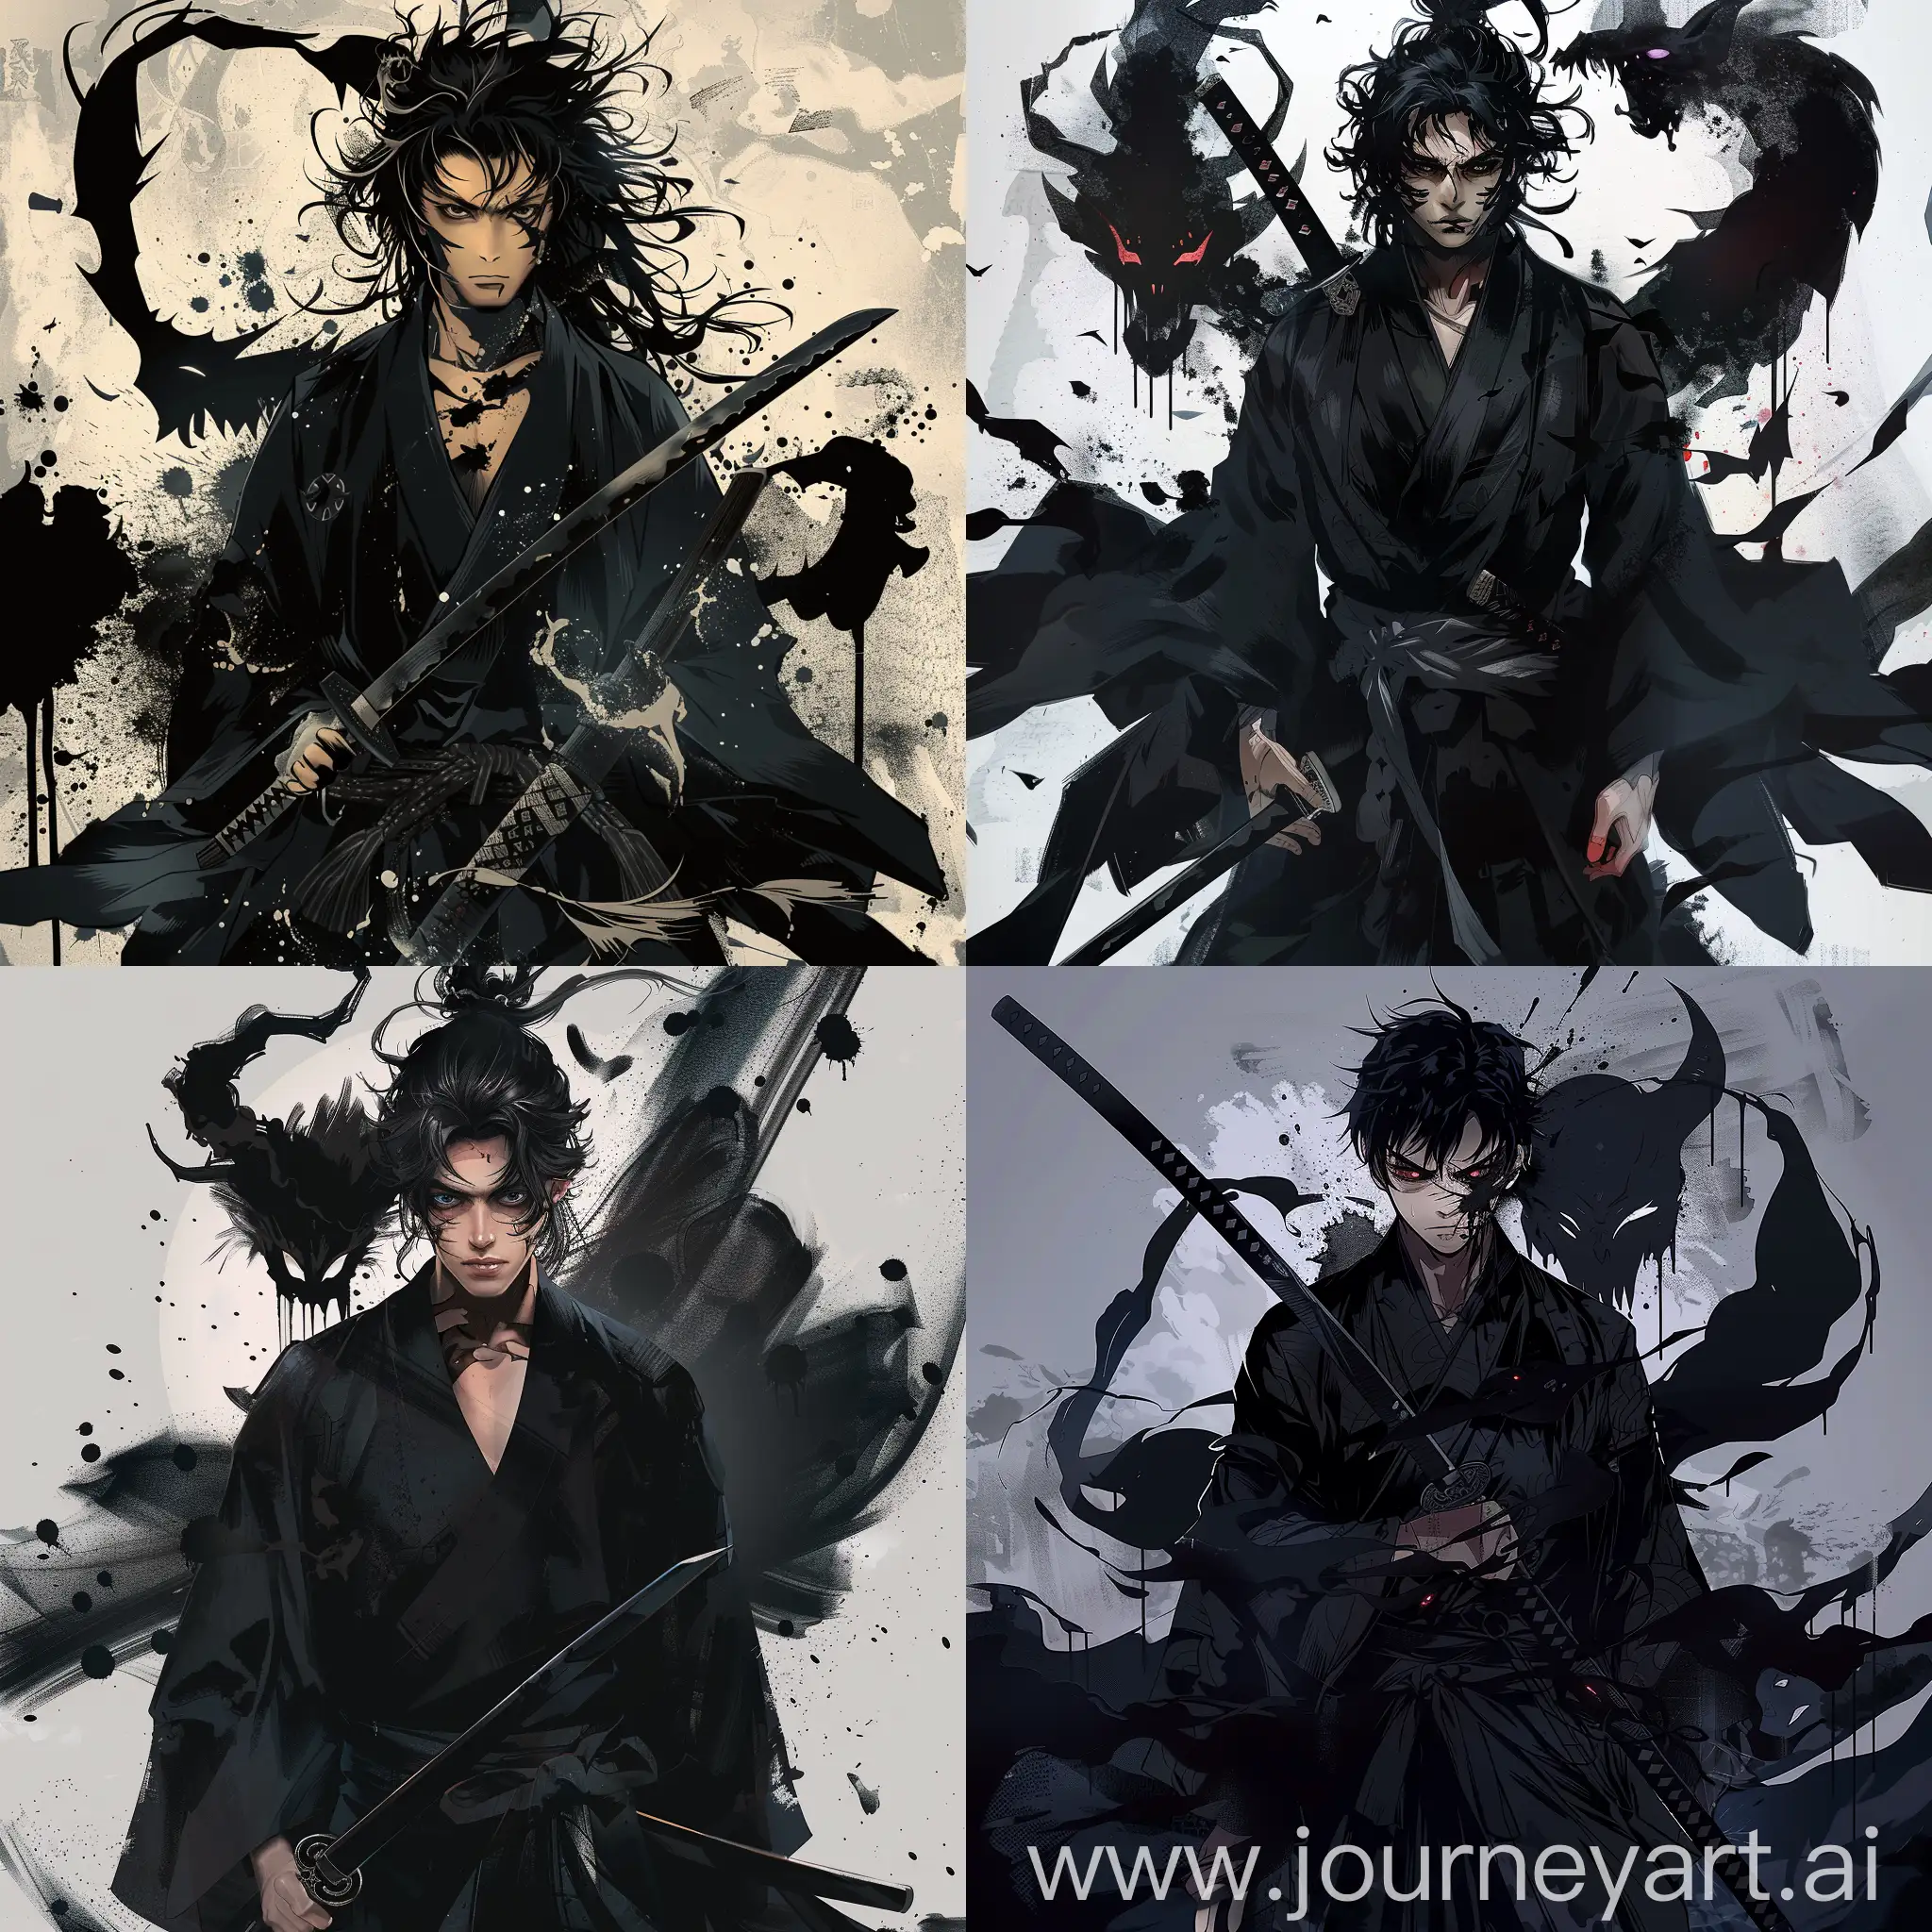 Brooding-Vagabond-Warrior-BlackHaired-Male-in-Oni-Mask-with-Shadows-and-Katana